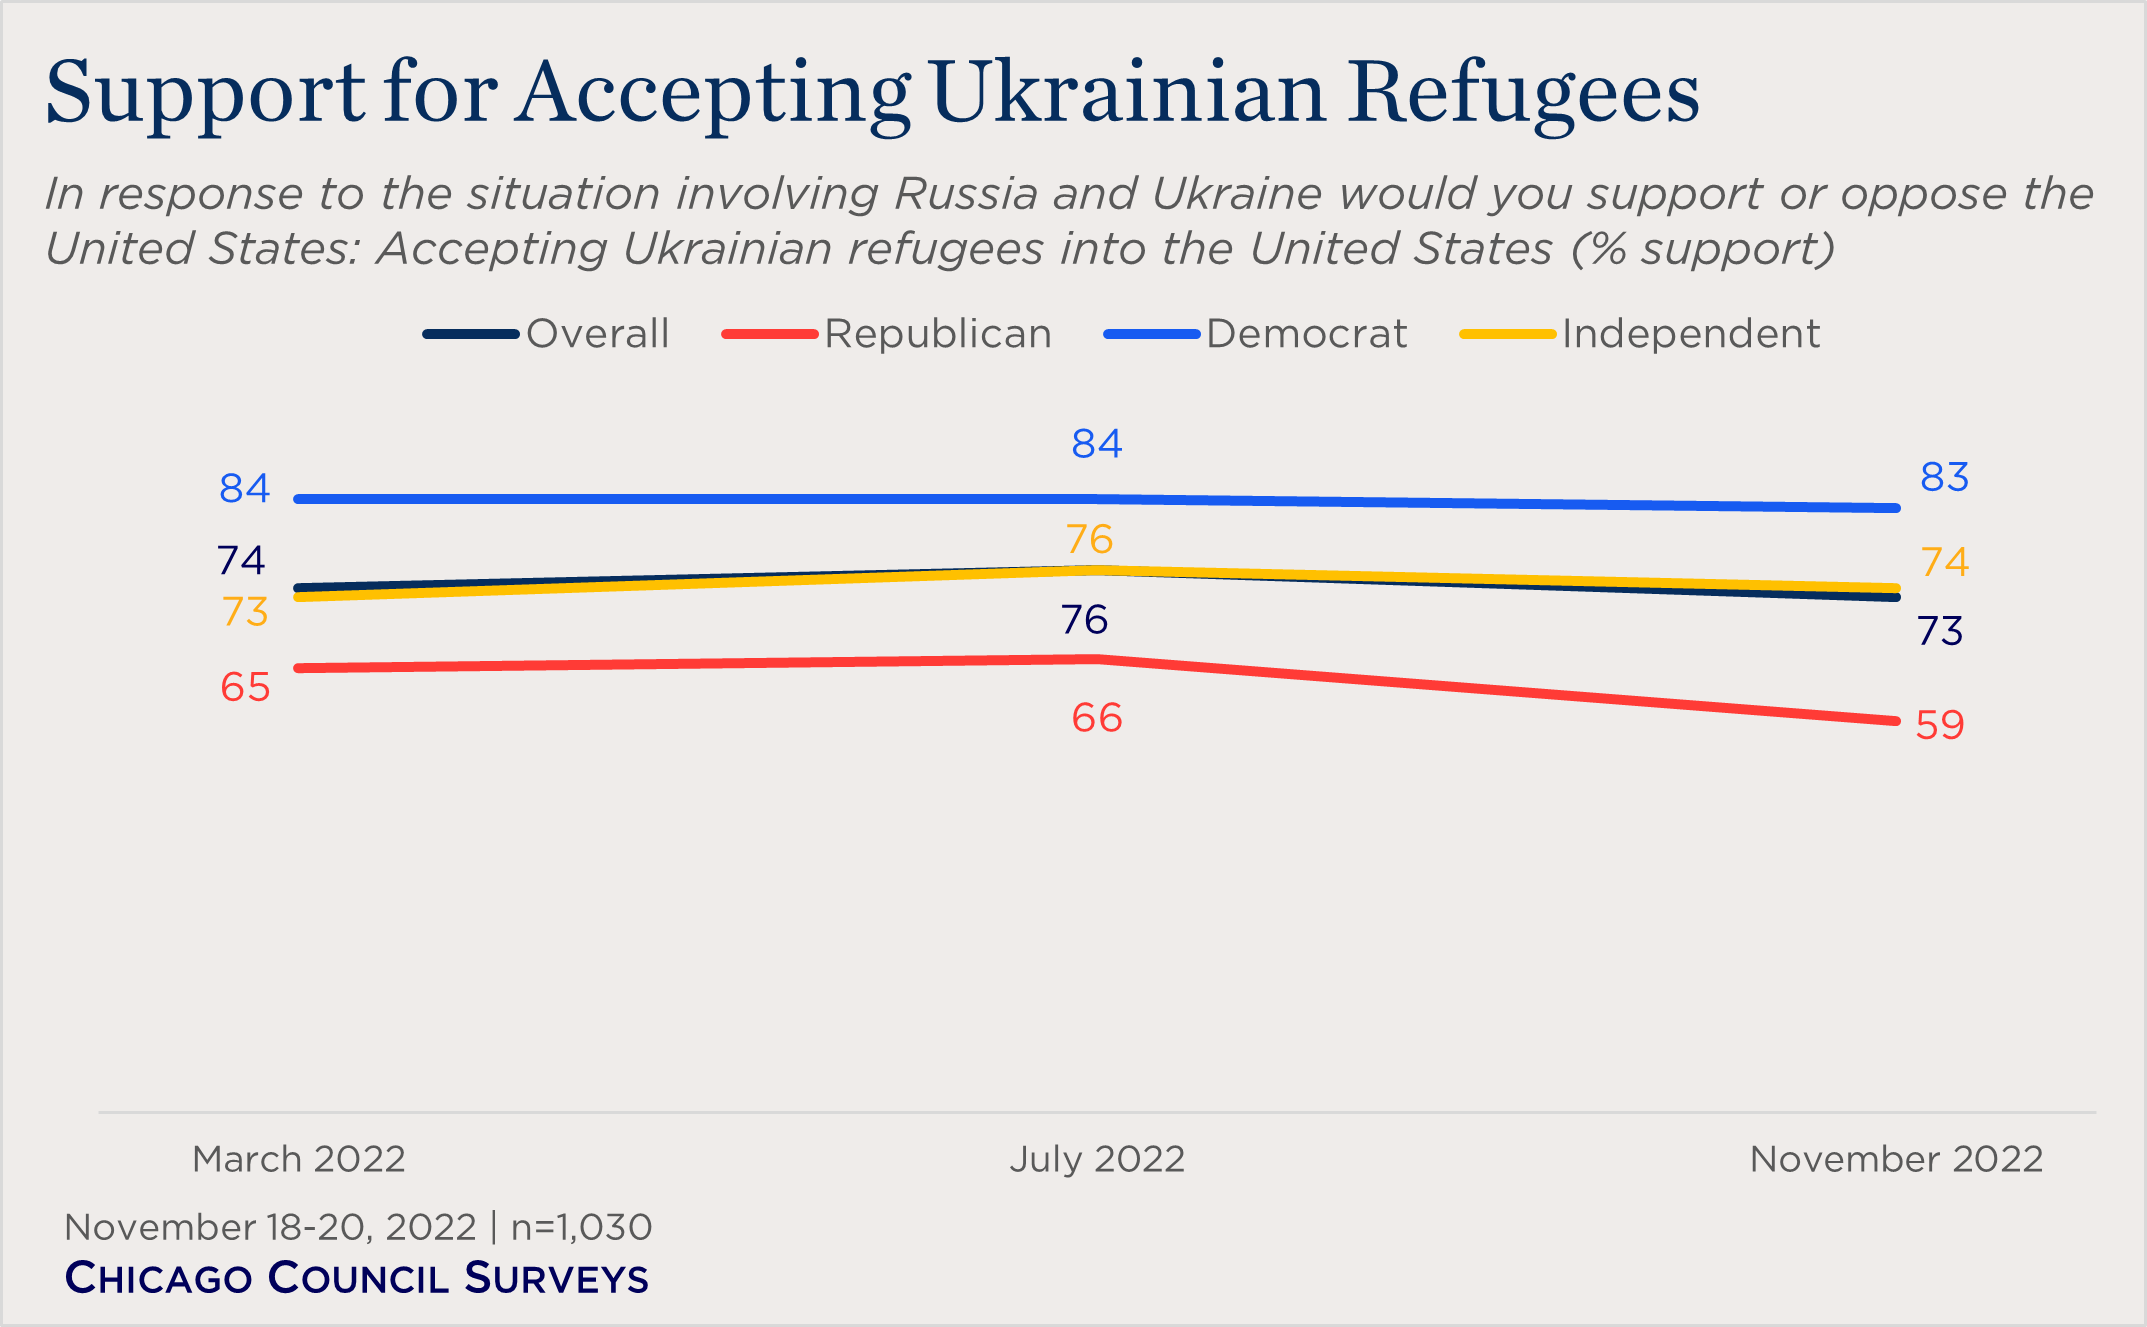 "line chart showing partisan support for accepting Ukrainian refugees over time"